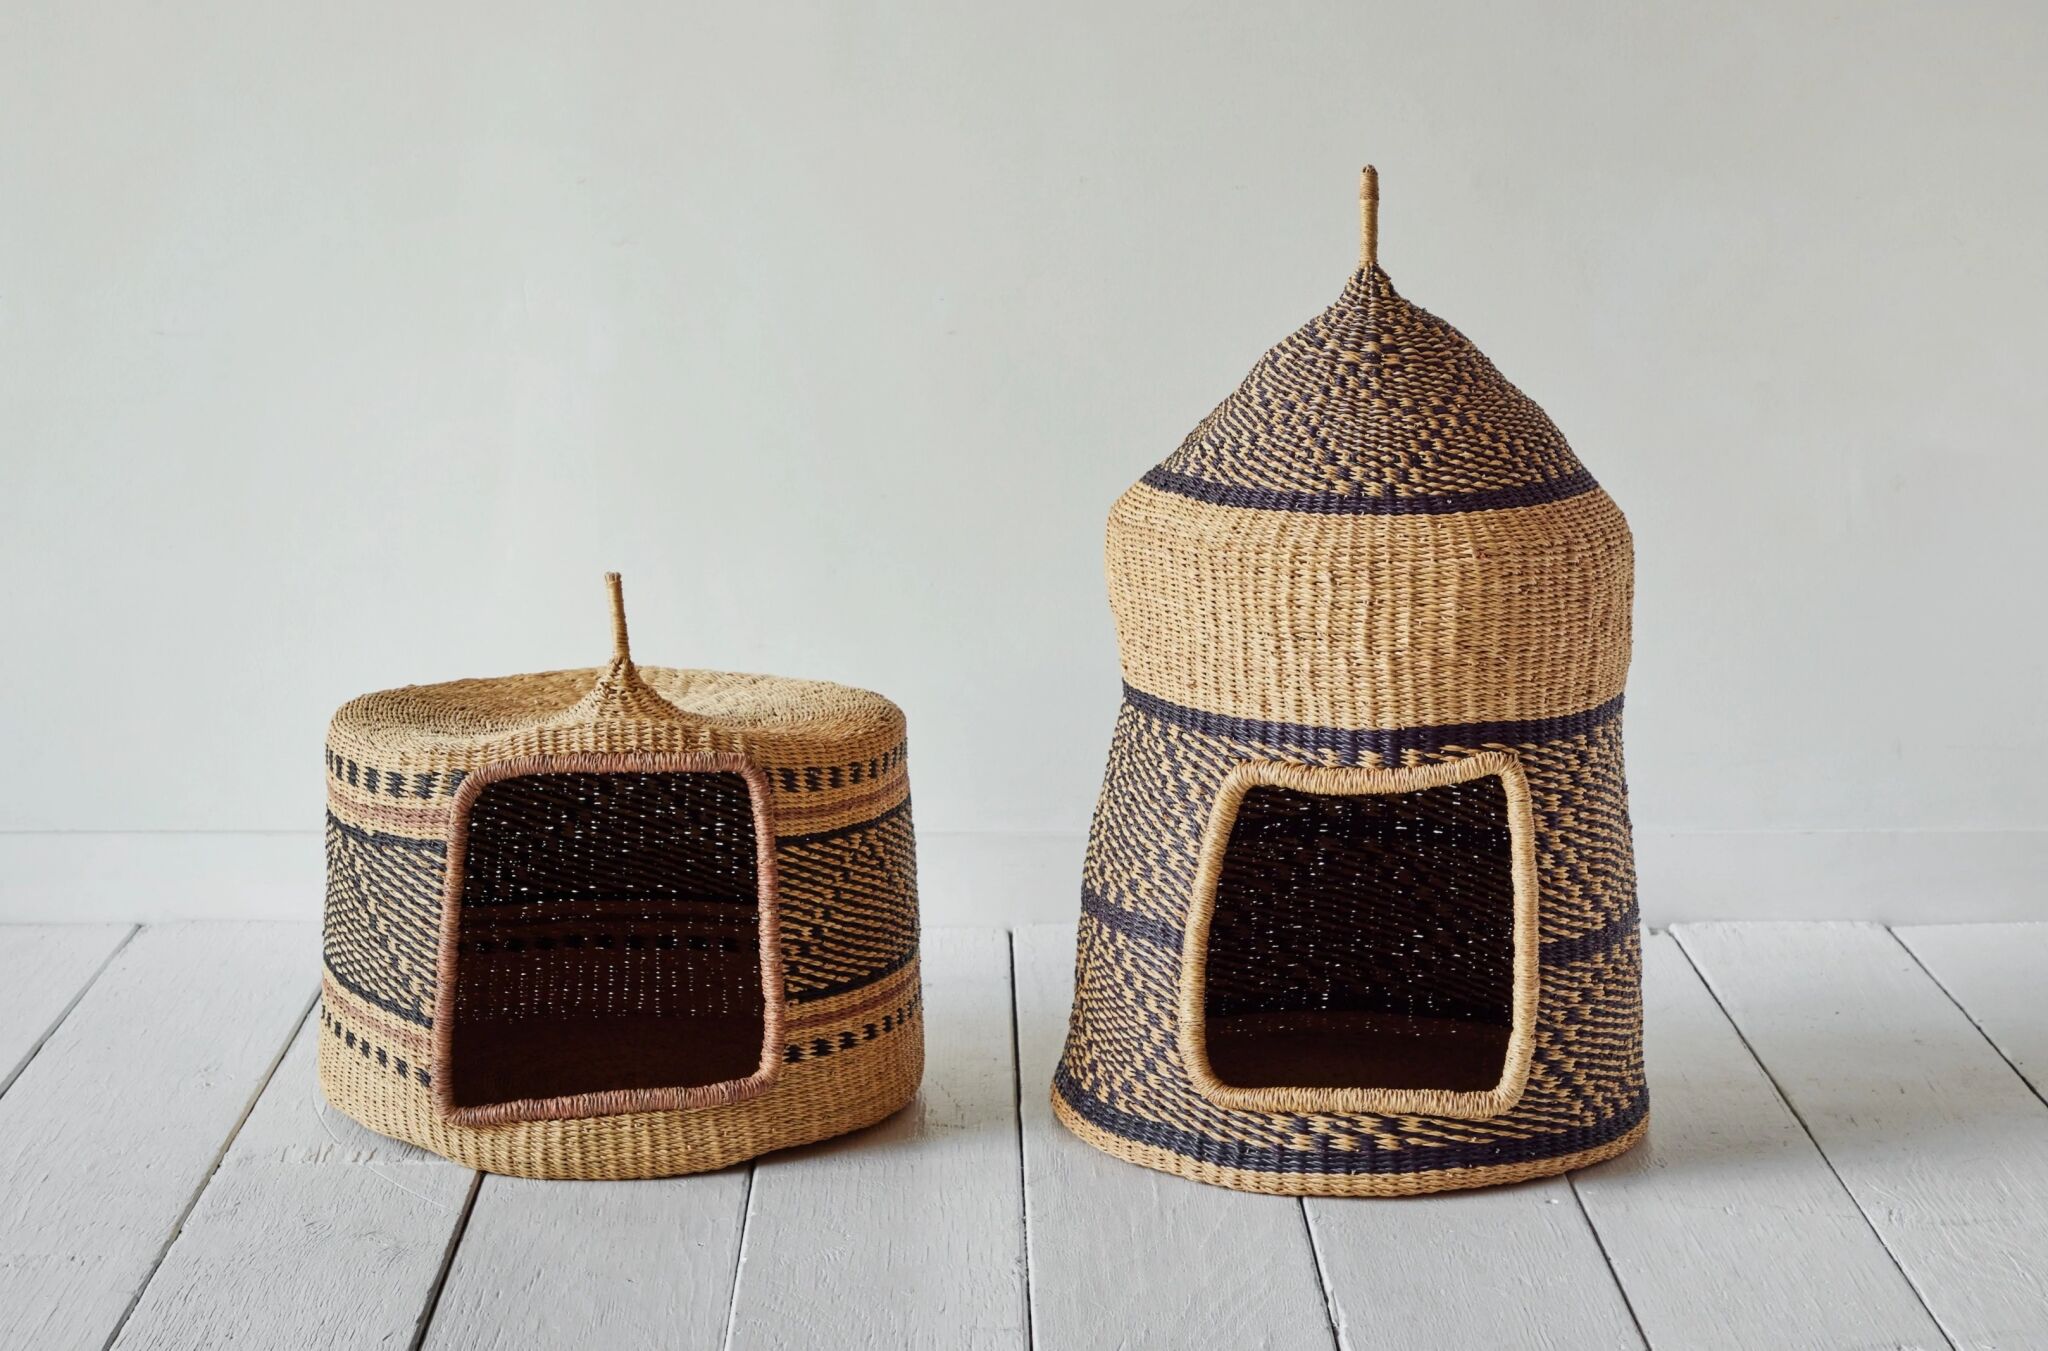 nickey kehoe woven pet huts from ghana, west africa 0